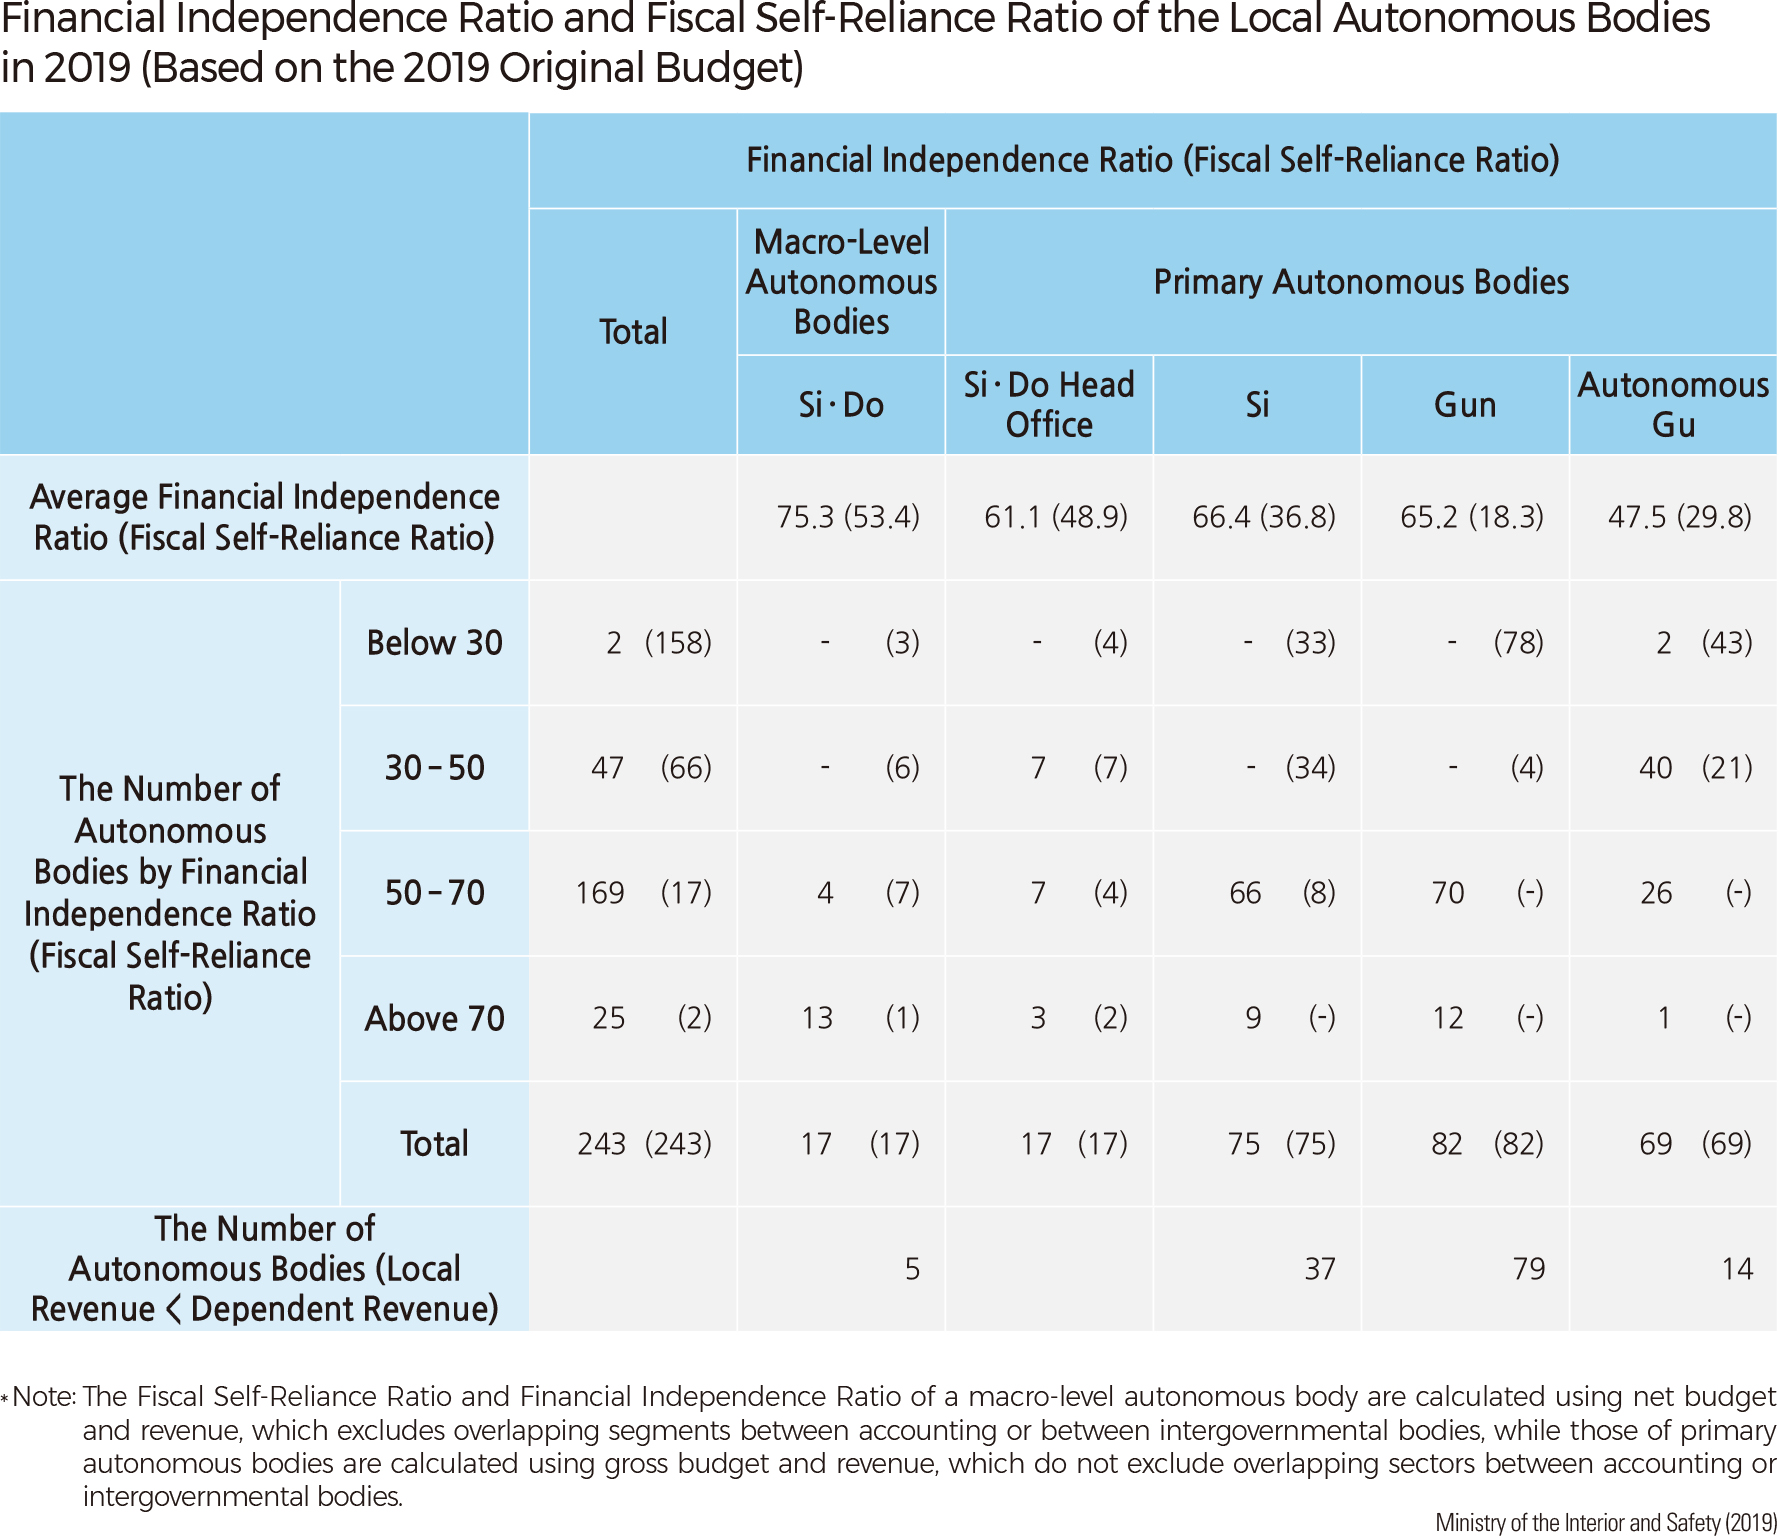 Financial Independence Ratio and Fiscal Self-Reliance Ratio of the Local Autonomous Bodies in 2019 (Based on the 2019 Original Budget)